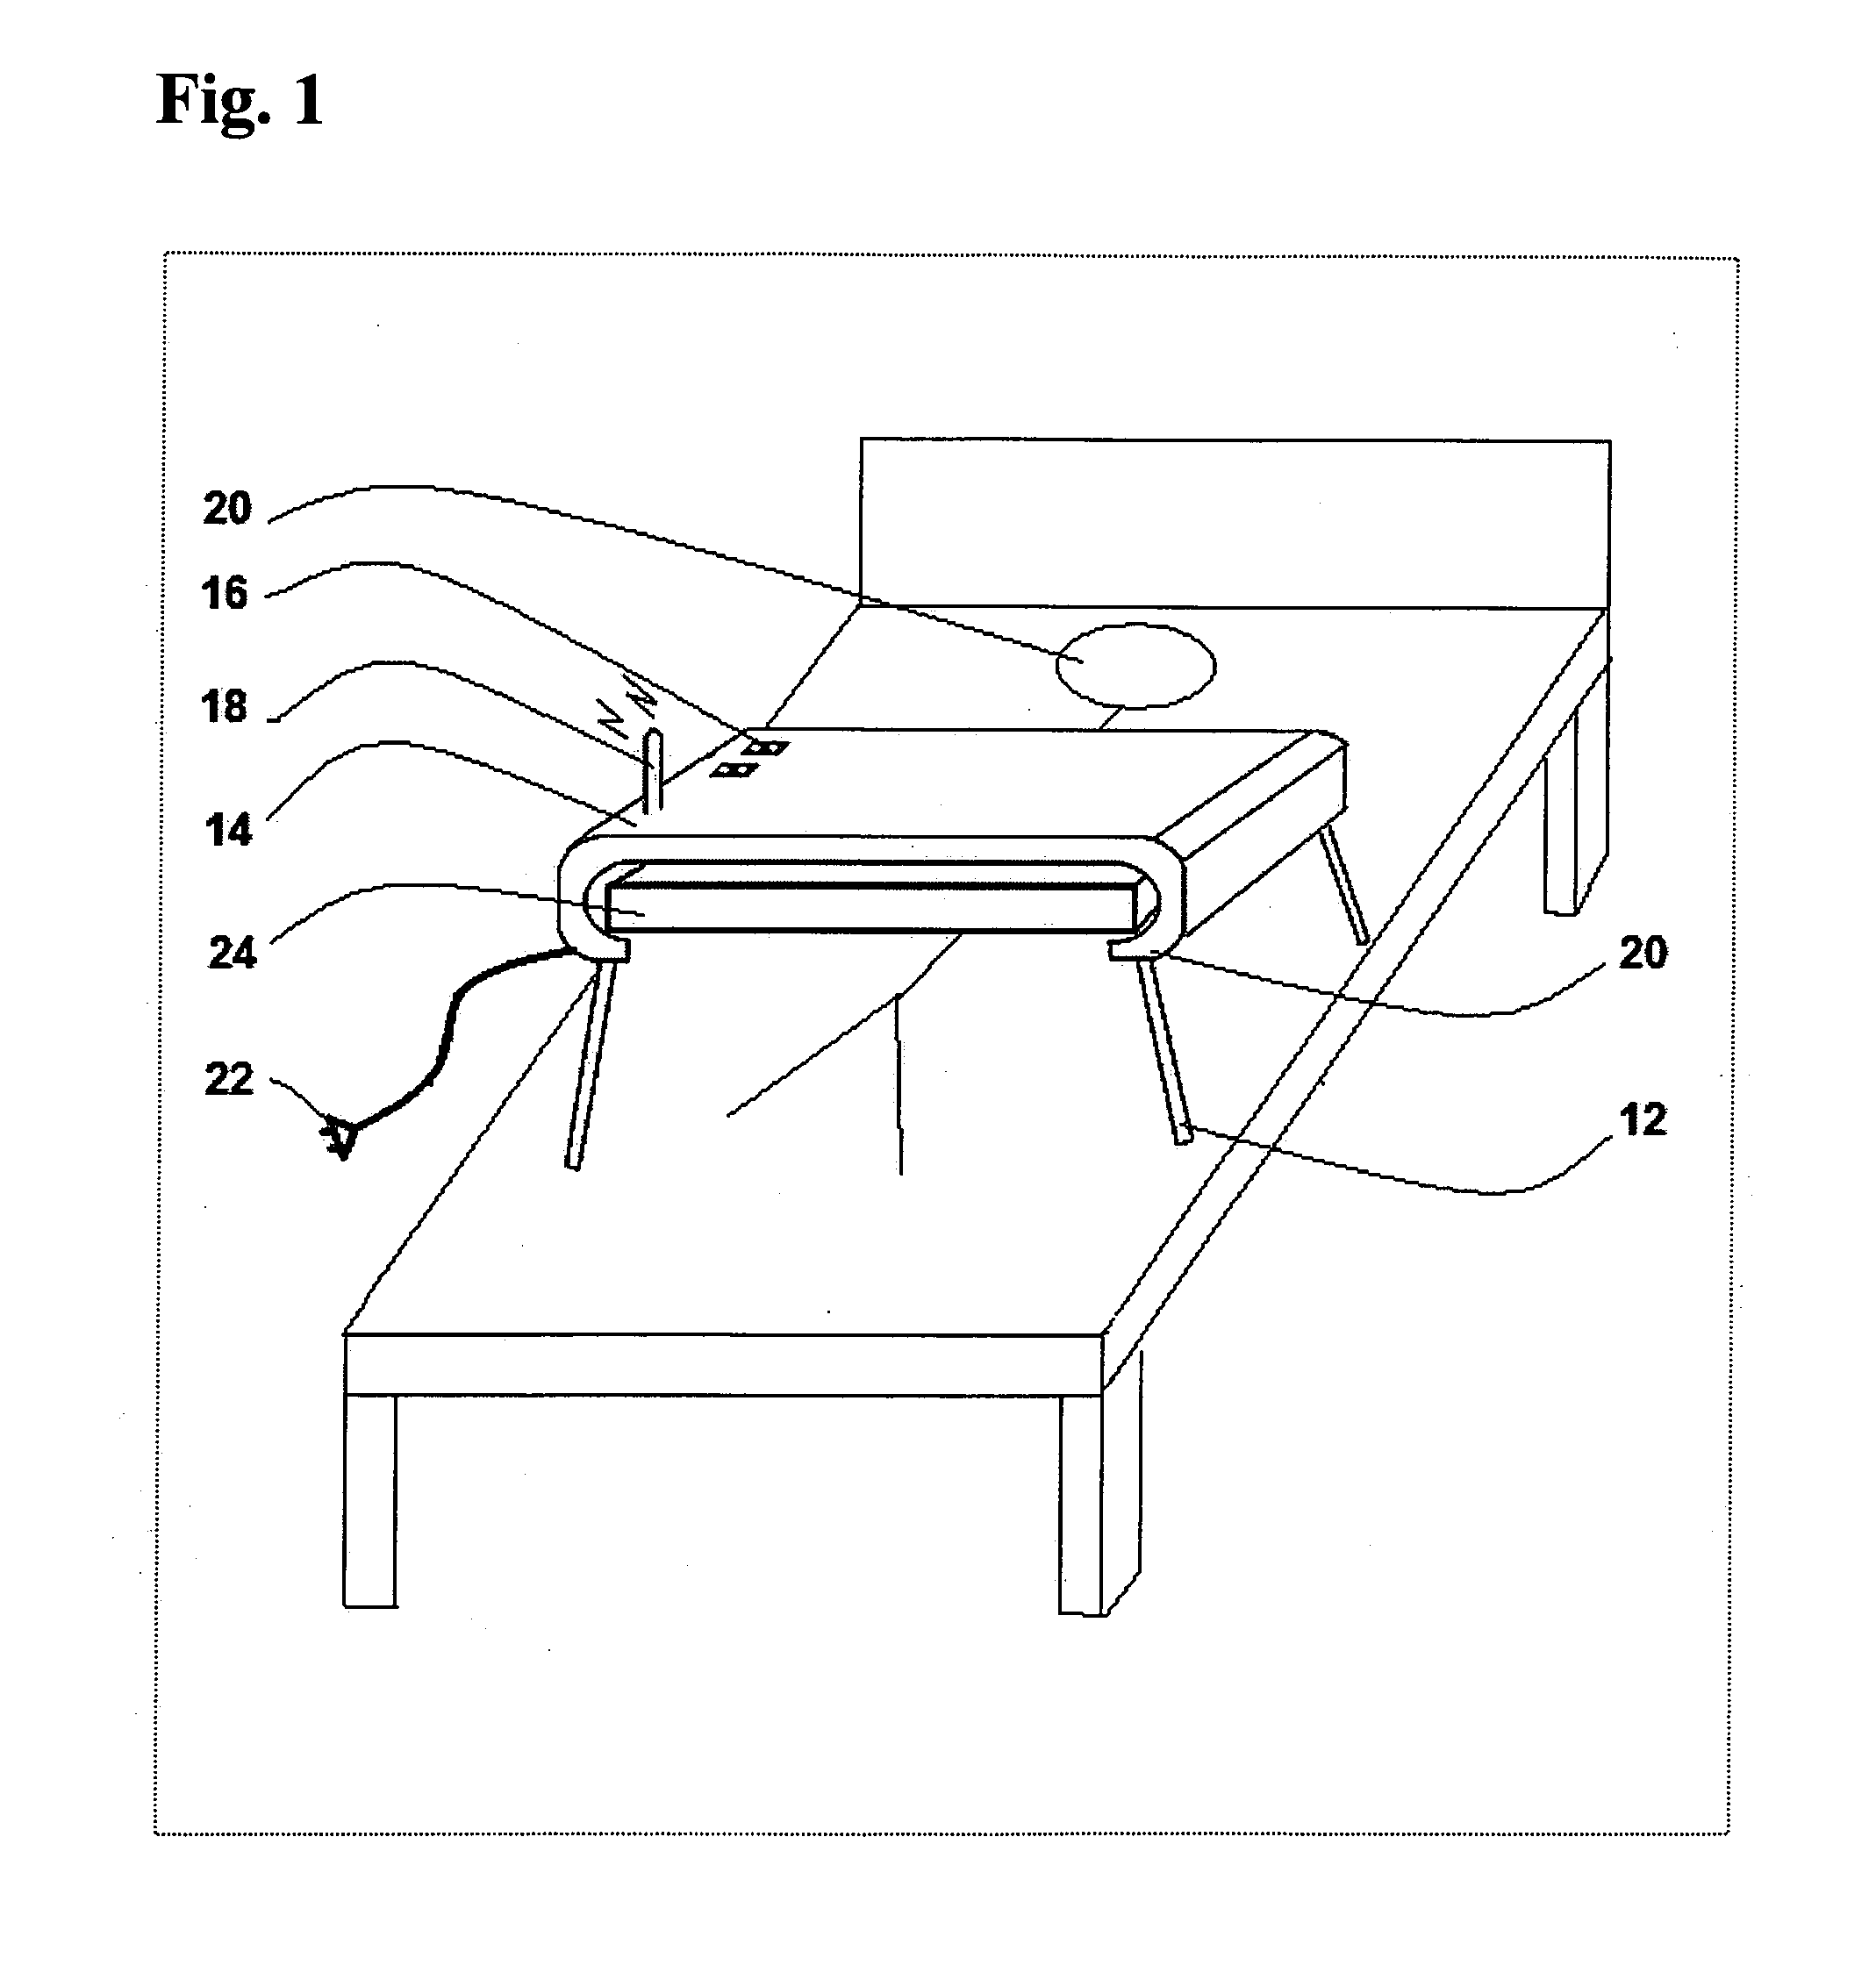 Display support apparatus for wireless operation in inclined or supine position